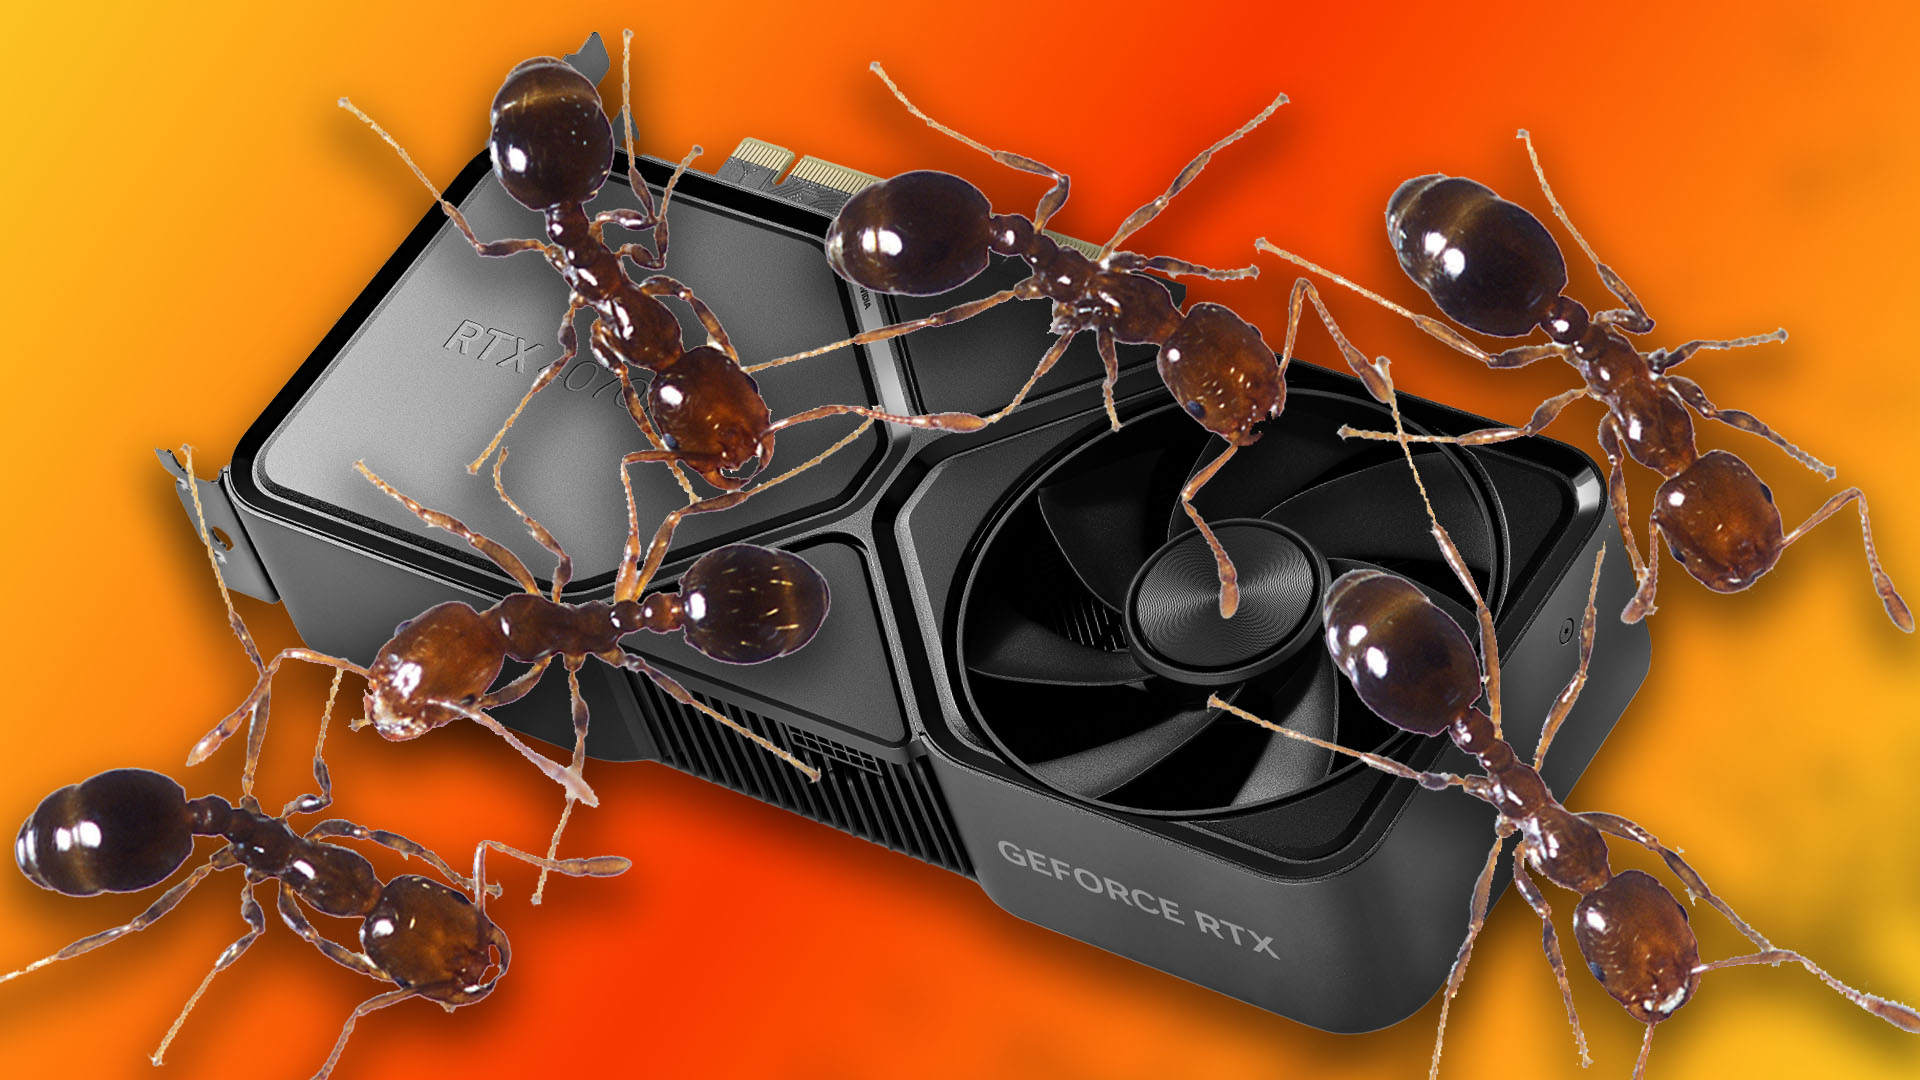 PCs are being infested by ants that eat thermal paste